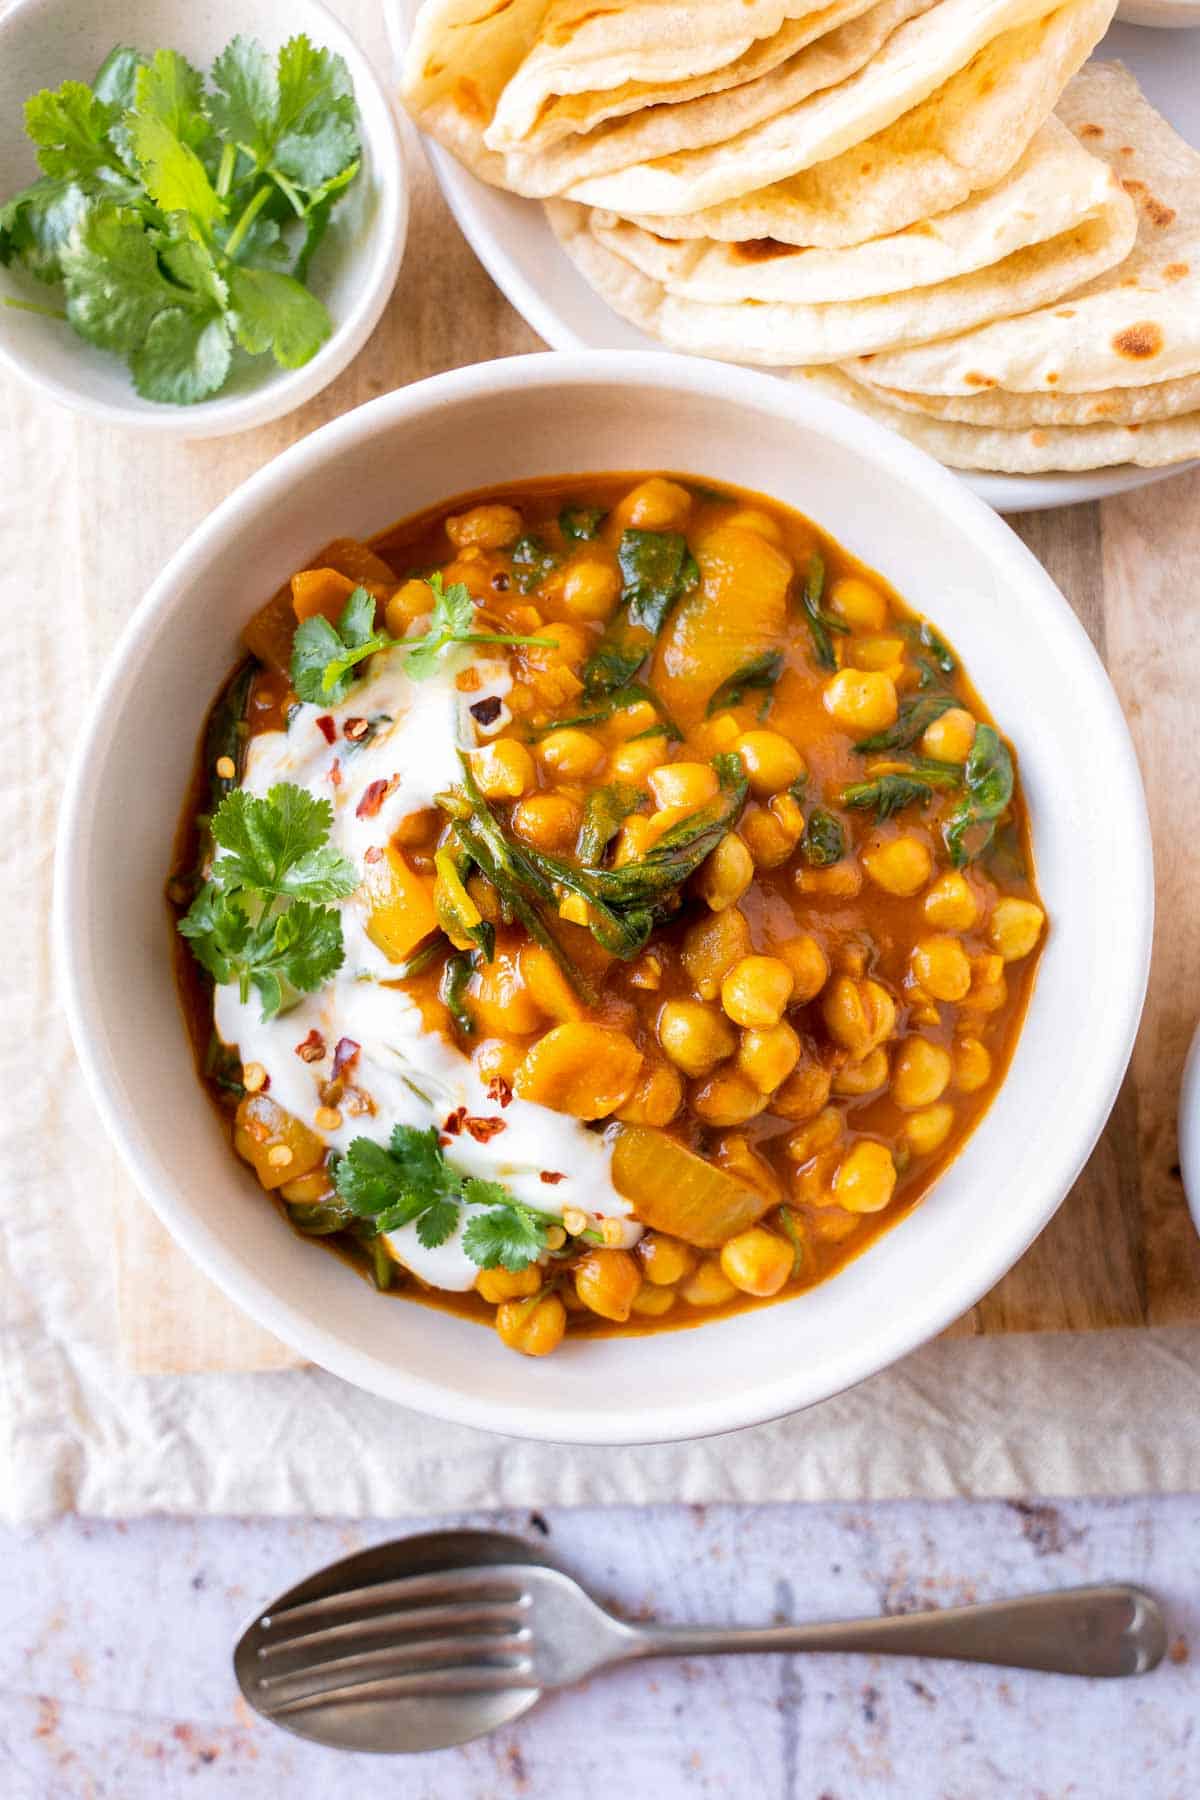 Chickpea and spinach curry served with naan.